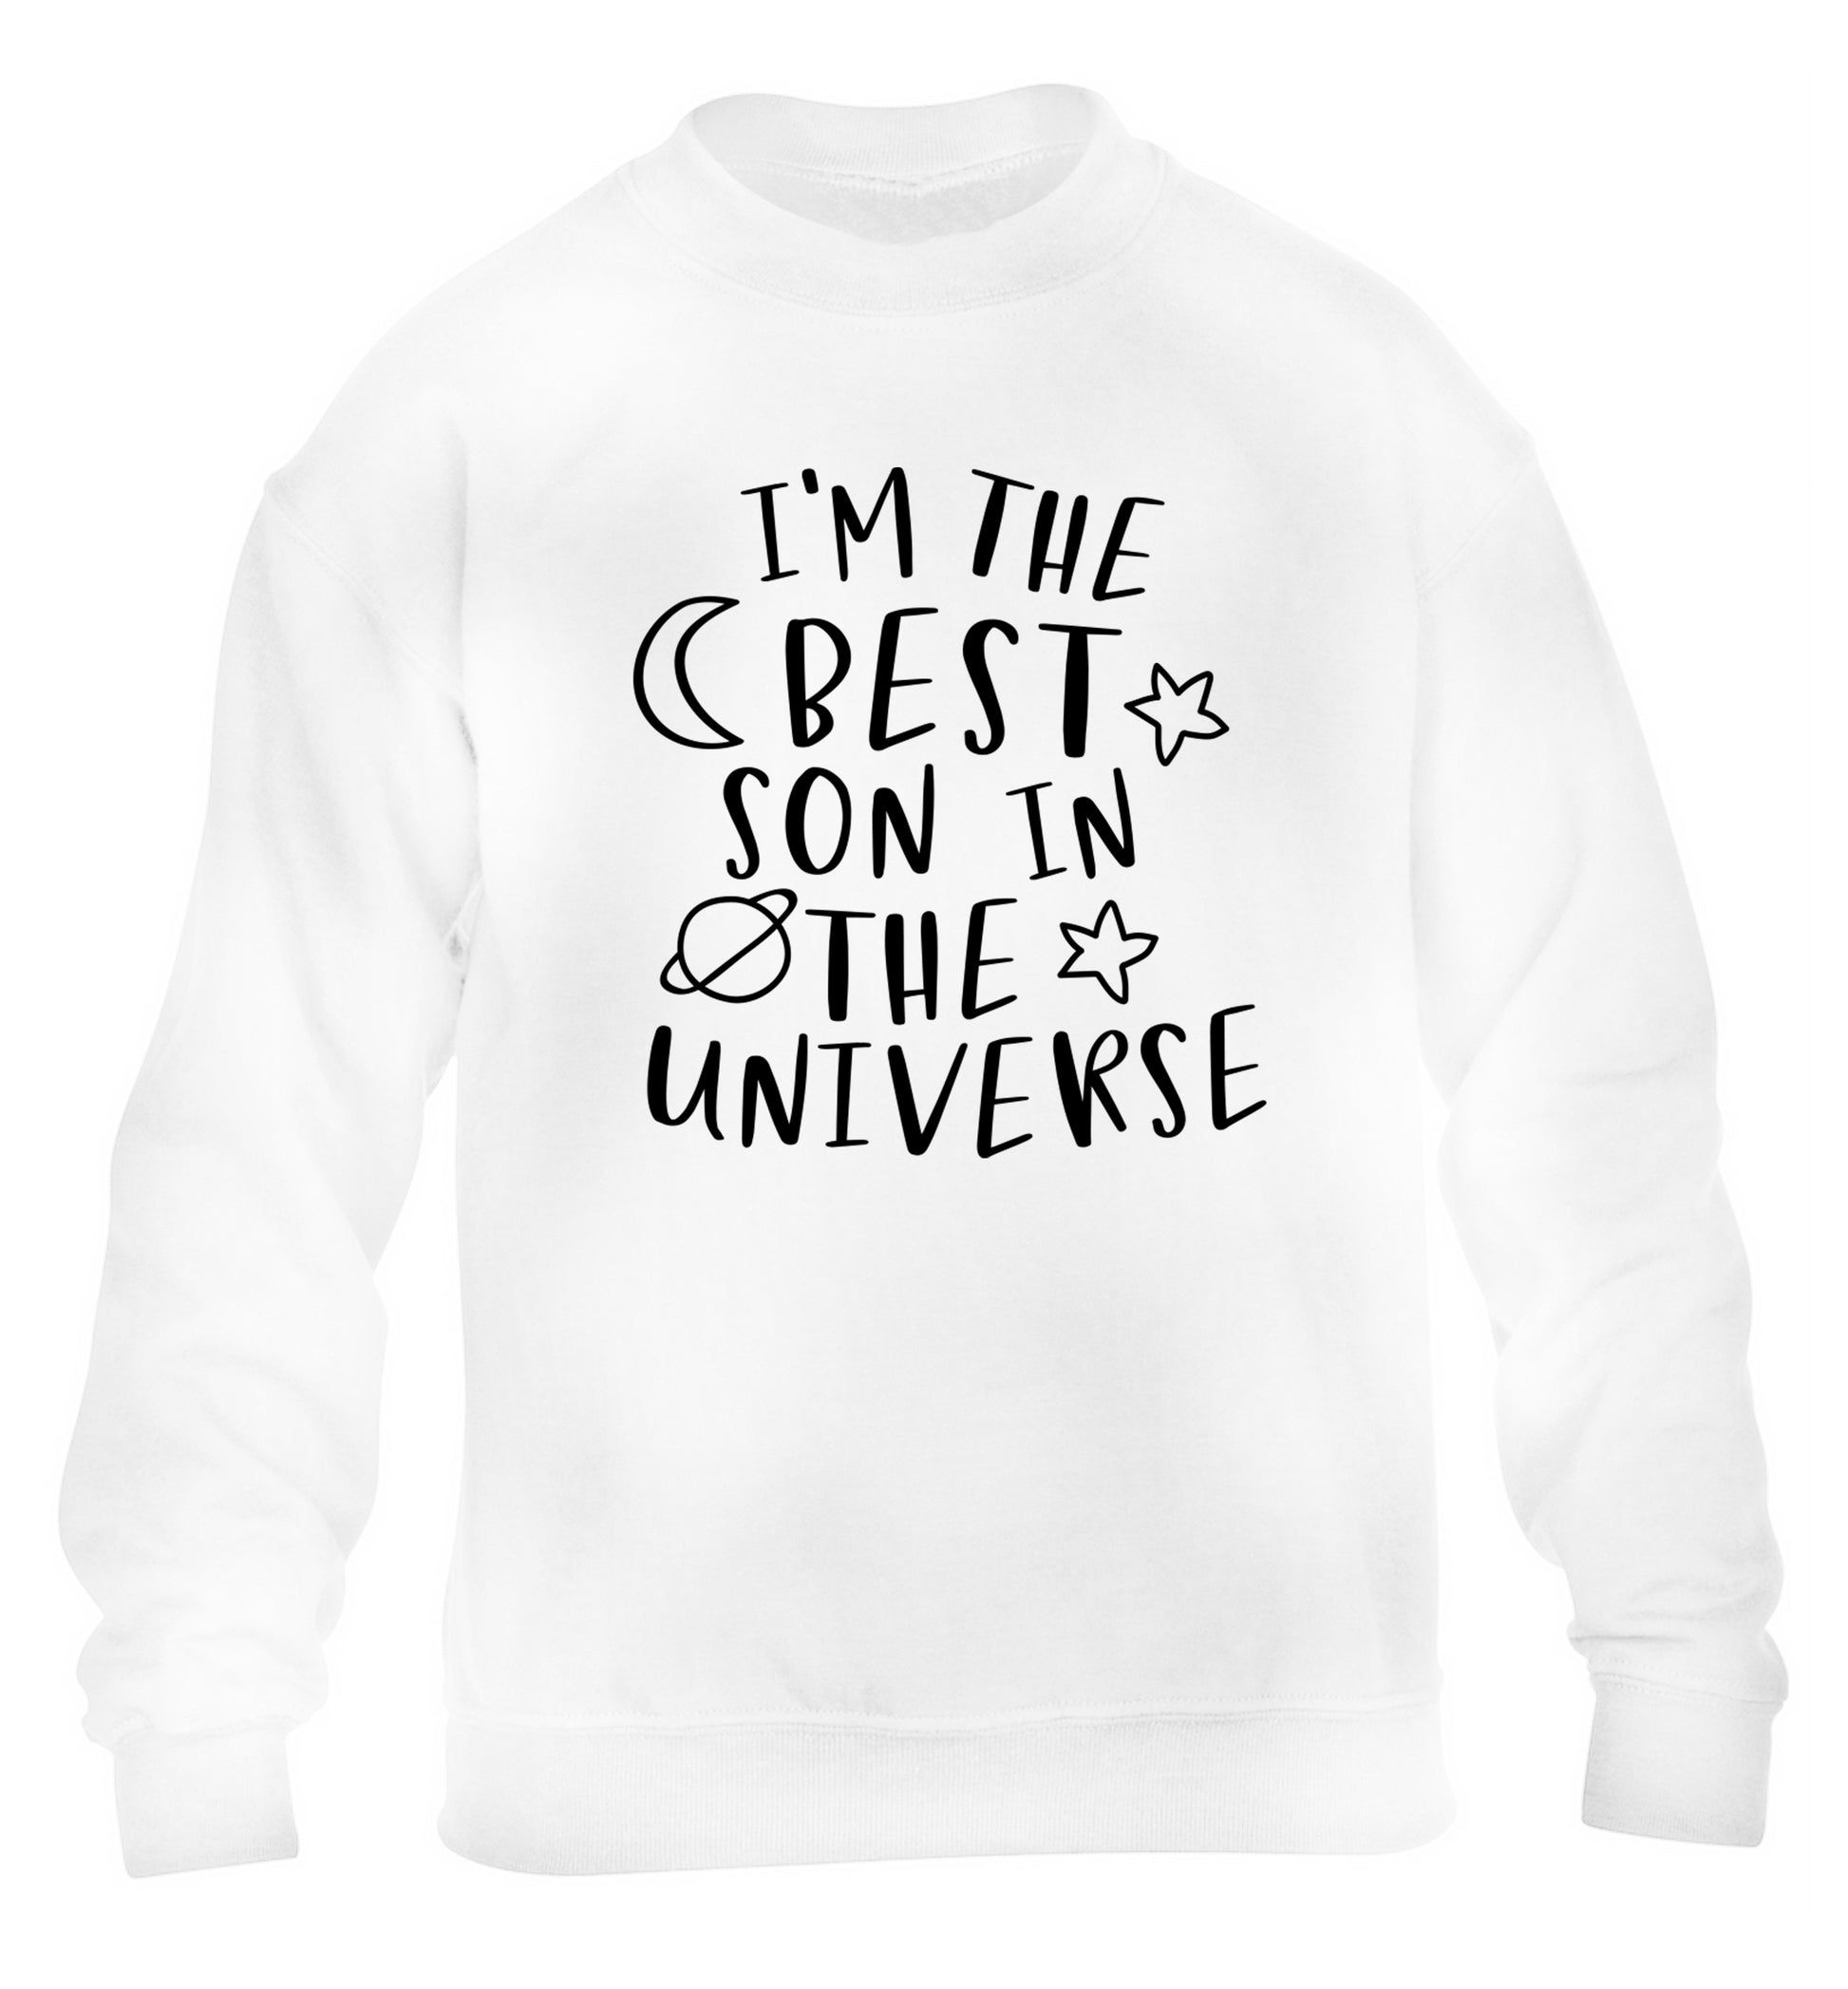 I'm the best son in the universe children's white sweater 12-13 Years